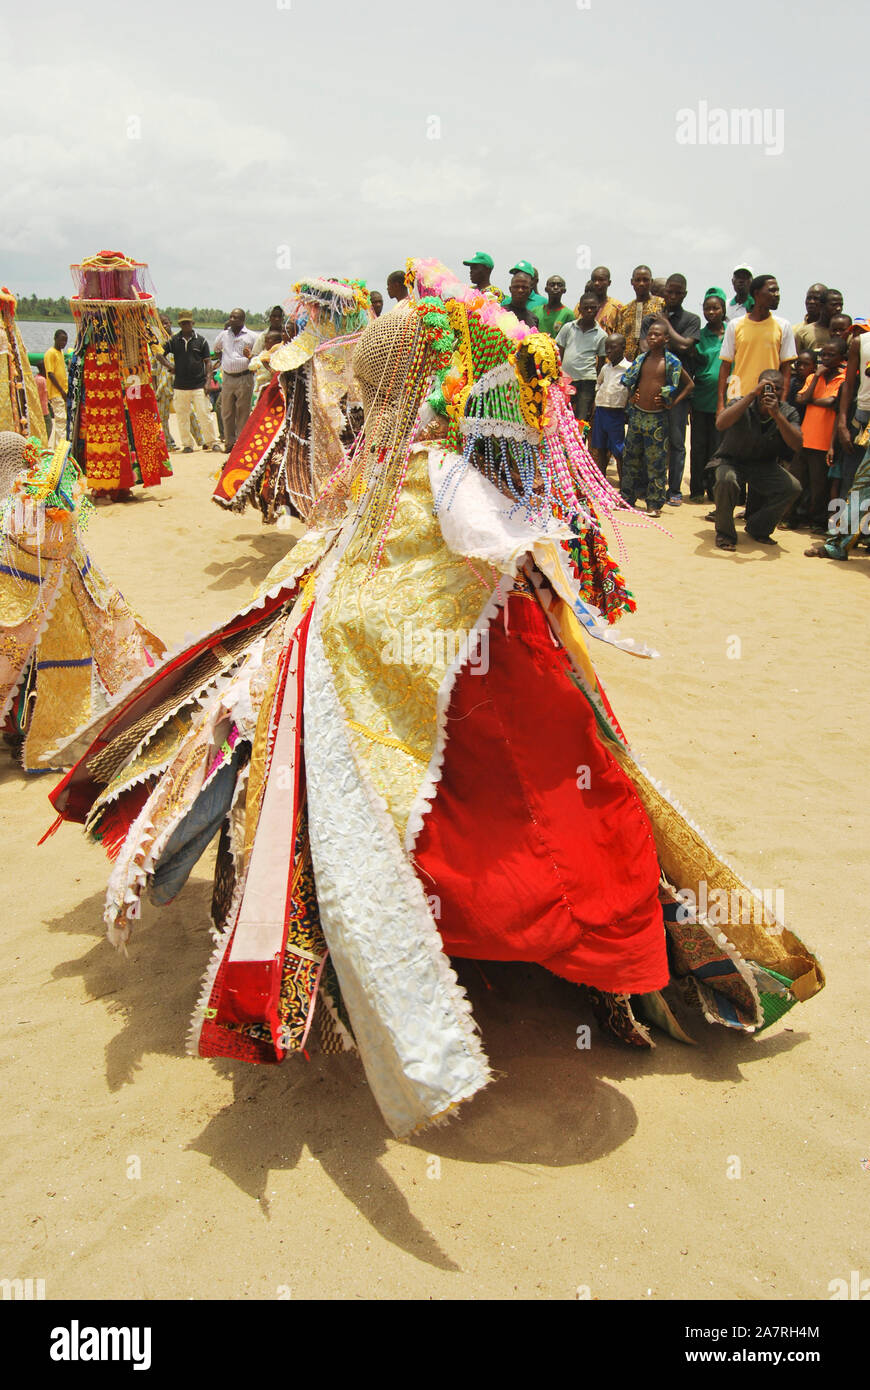 ORI-ADE Masks dancing at the Bank of Badagry Historical Slave Trade Beach during the Annual Lagos Black Heritage Festival. The Masquerades are popularly celebrated among Yoruba people of southwest Nigeria for ritual purposes and entertainment. Stock Photo